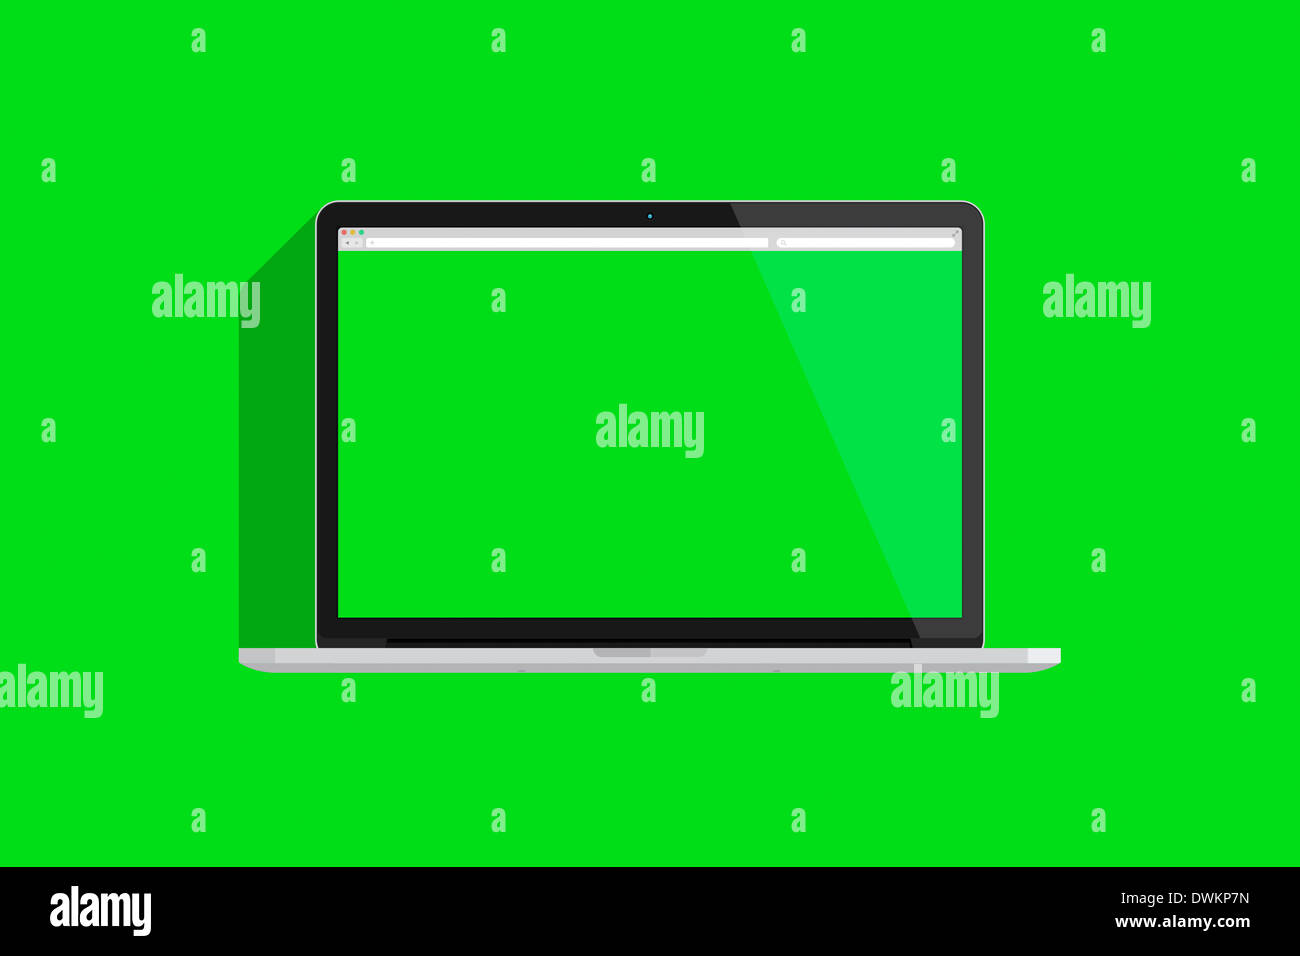 Illustration of a mac book, colored background. Stock Photo